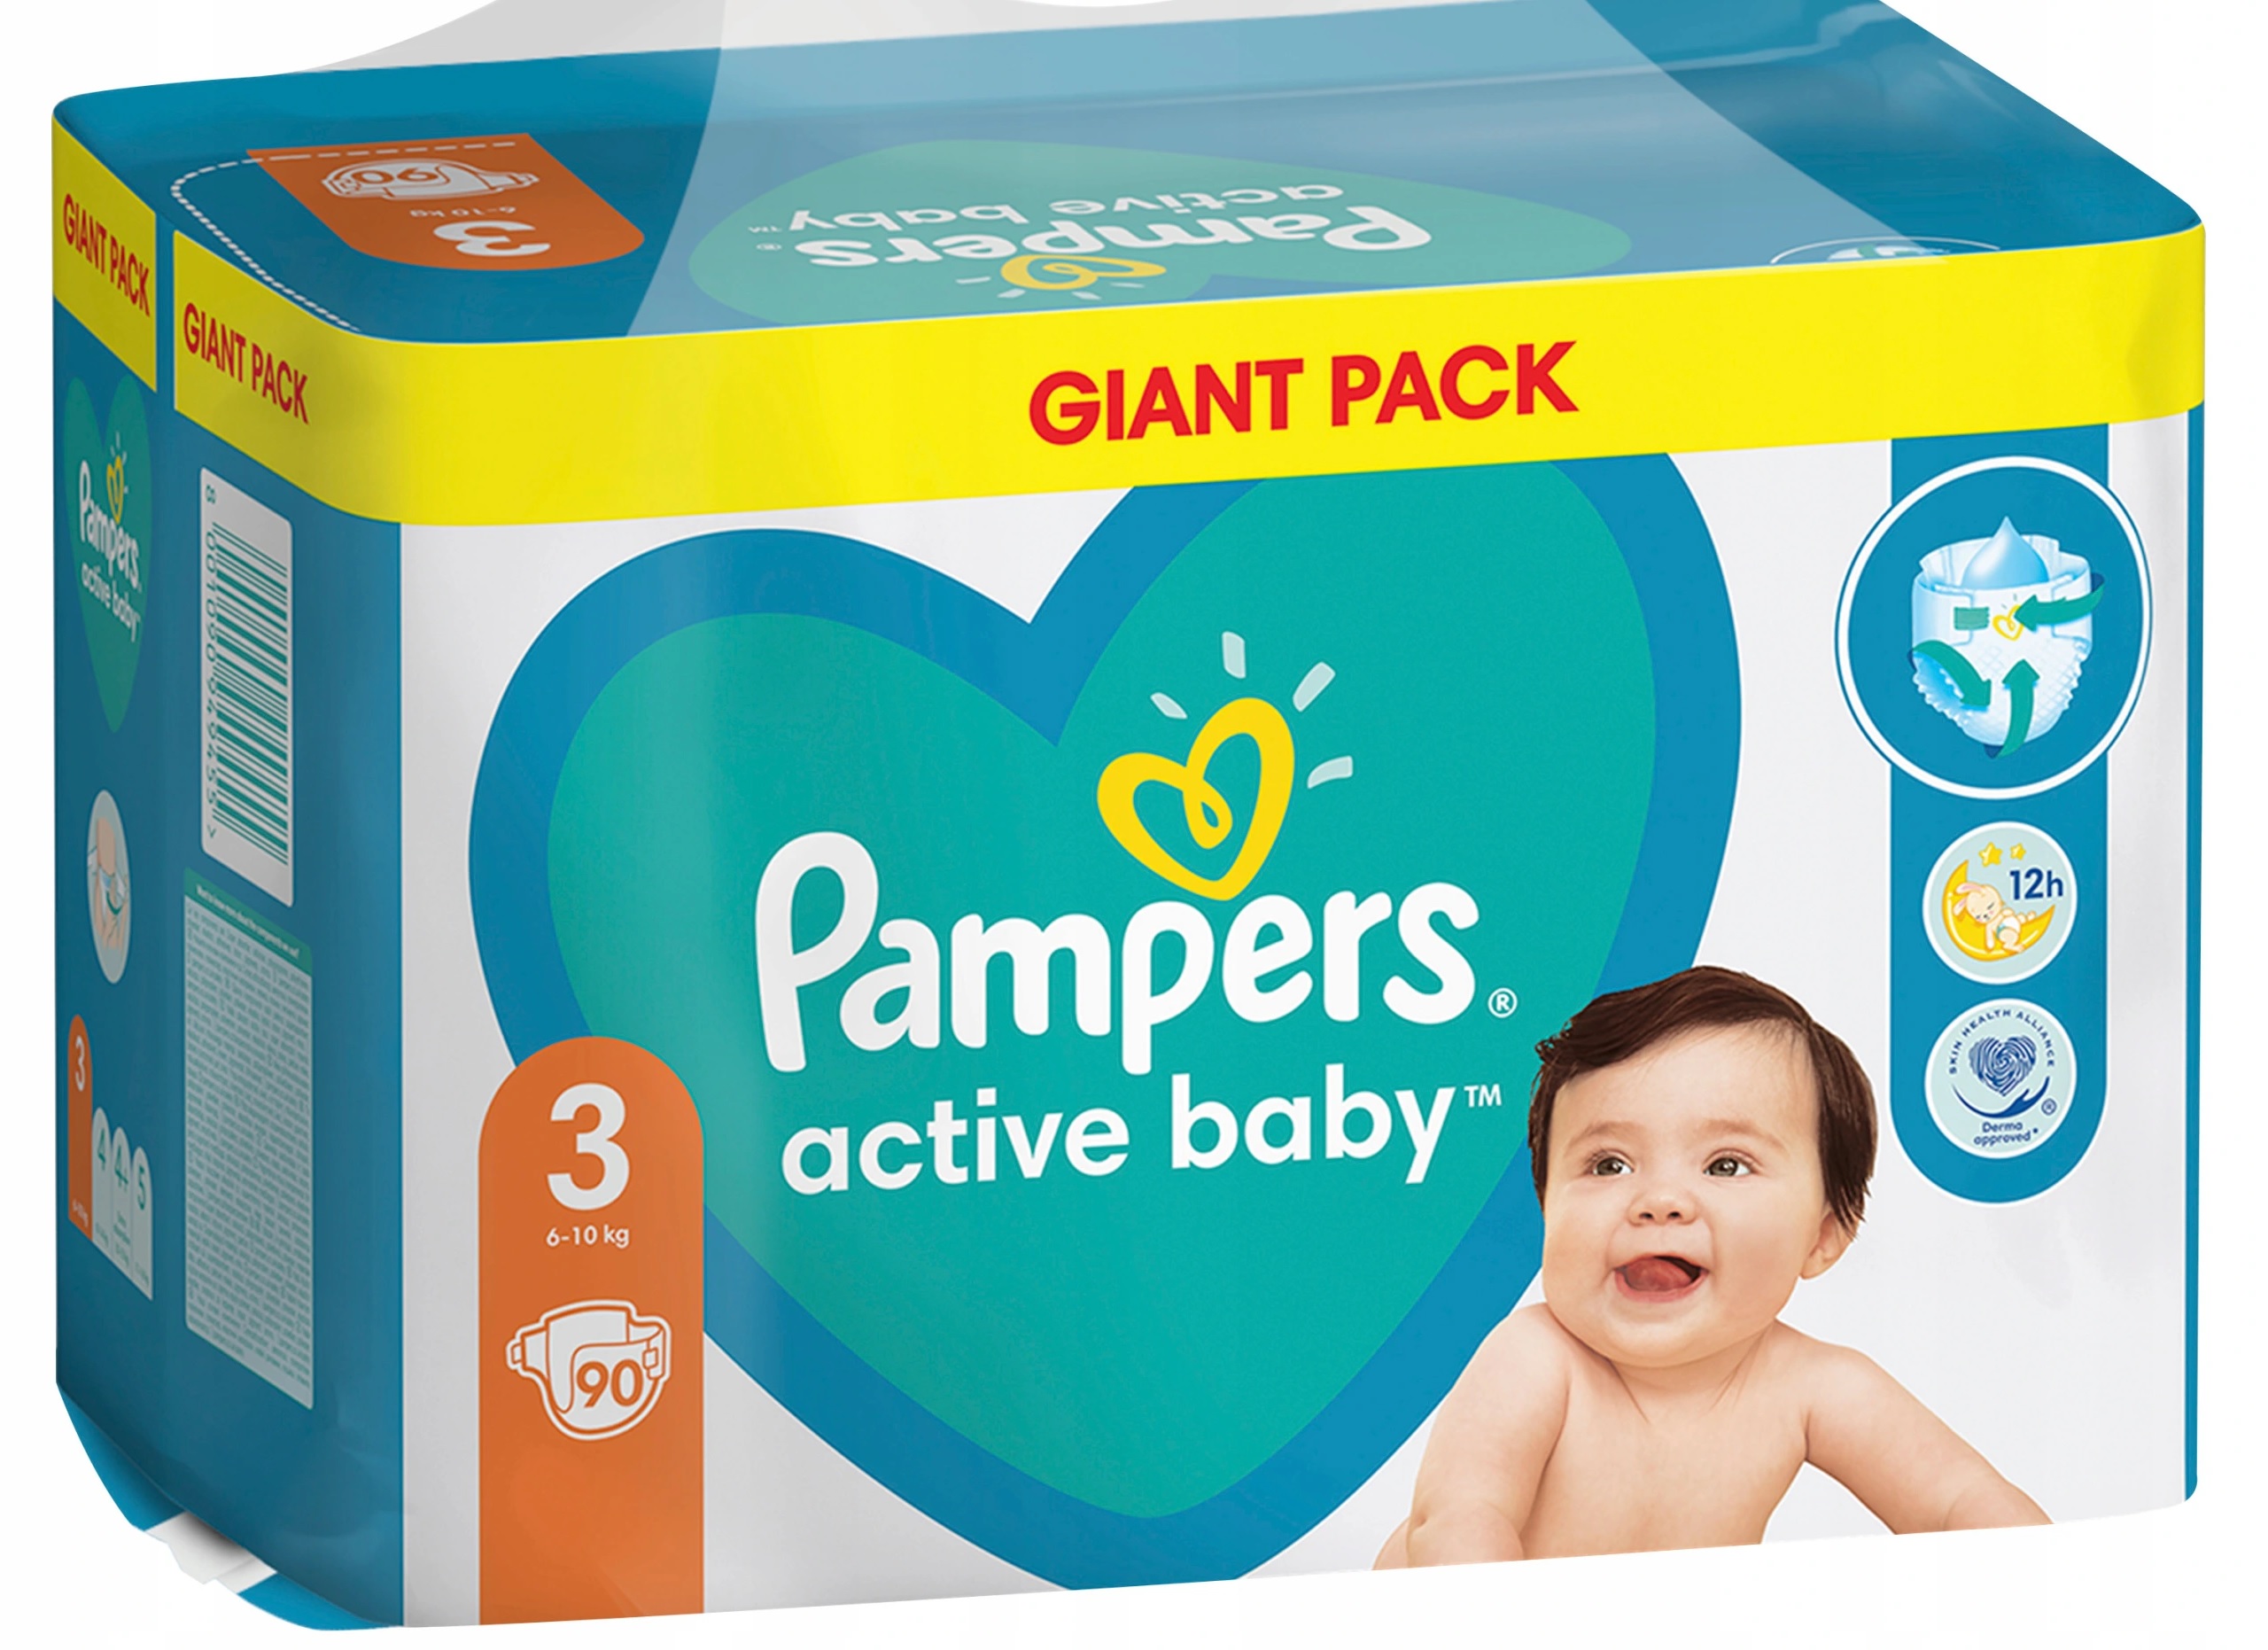 pampers premium care 3 emag